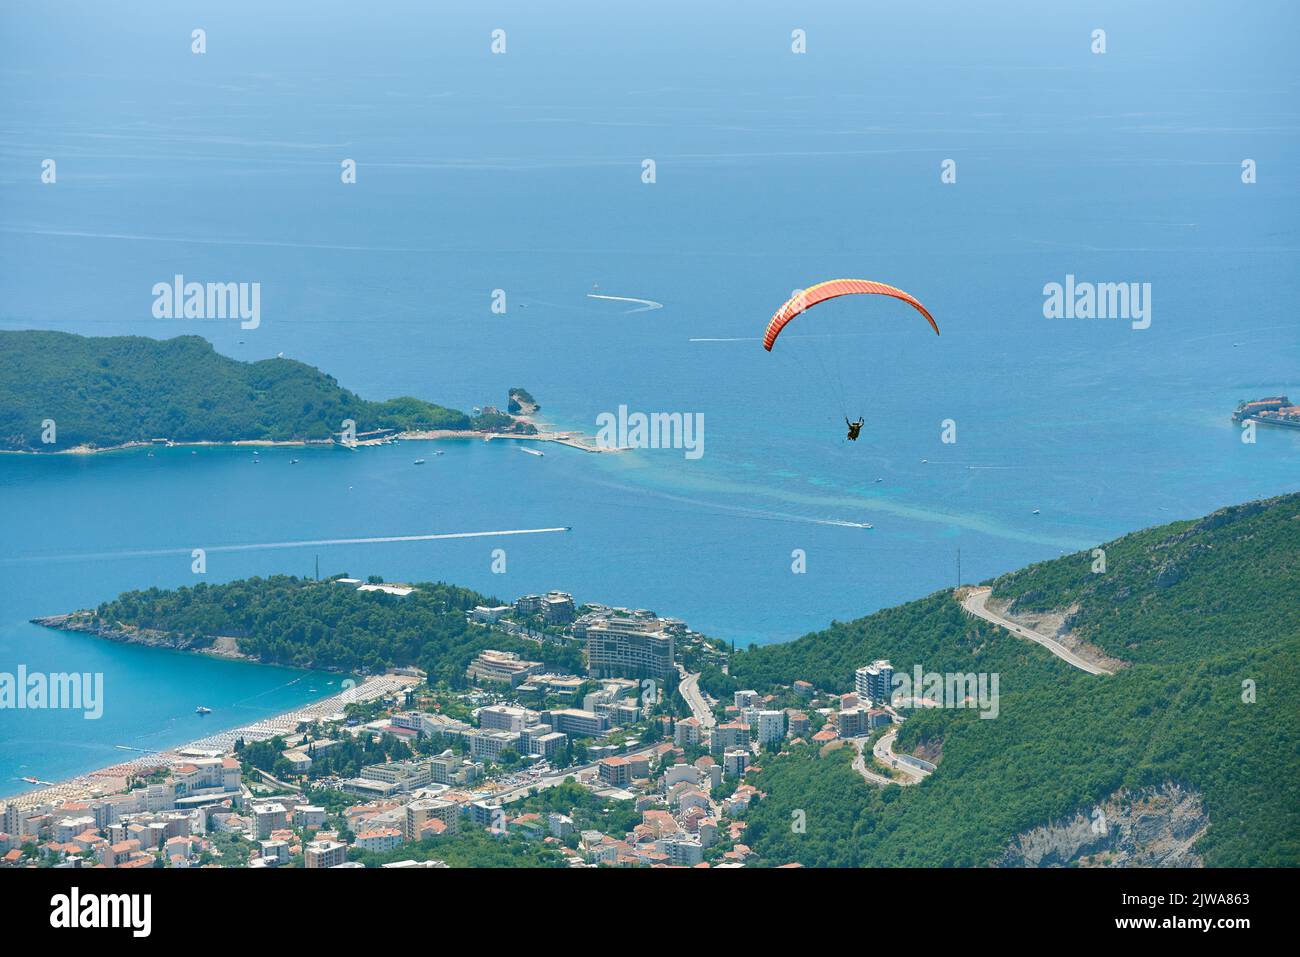 Paragliding tandem with tourist above city of Budva, Montenegro Stock Photo